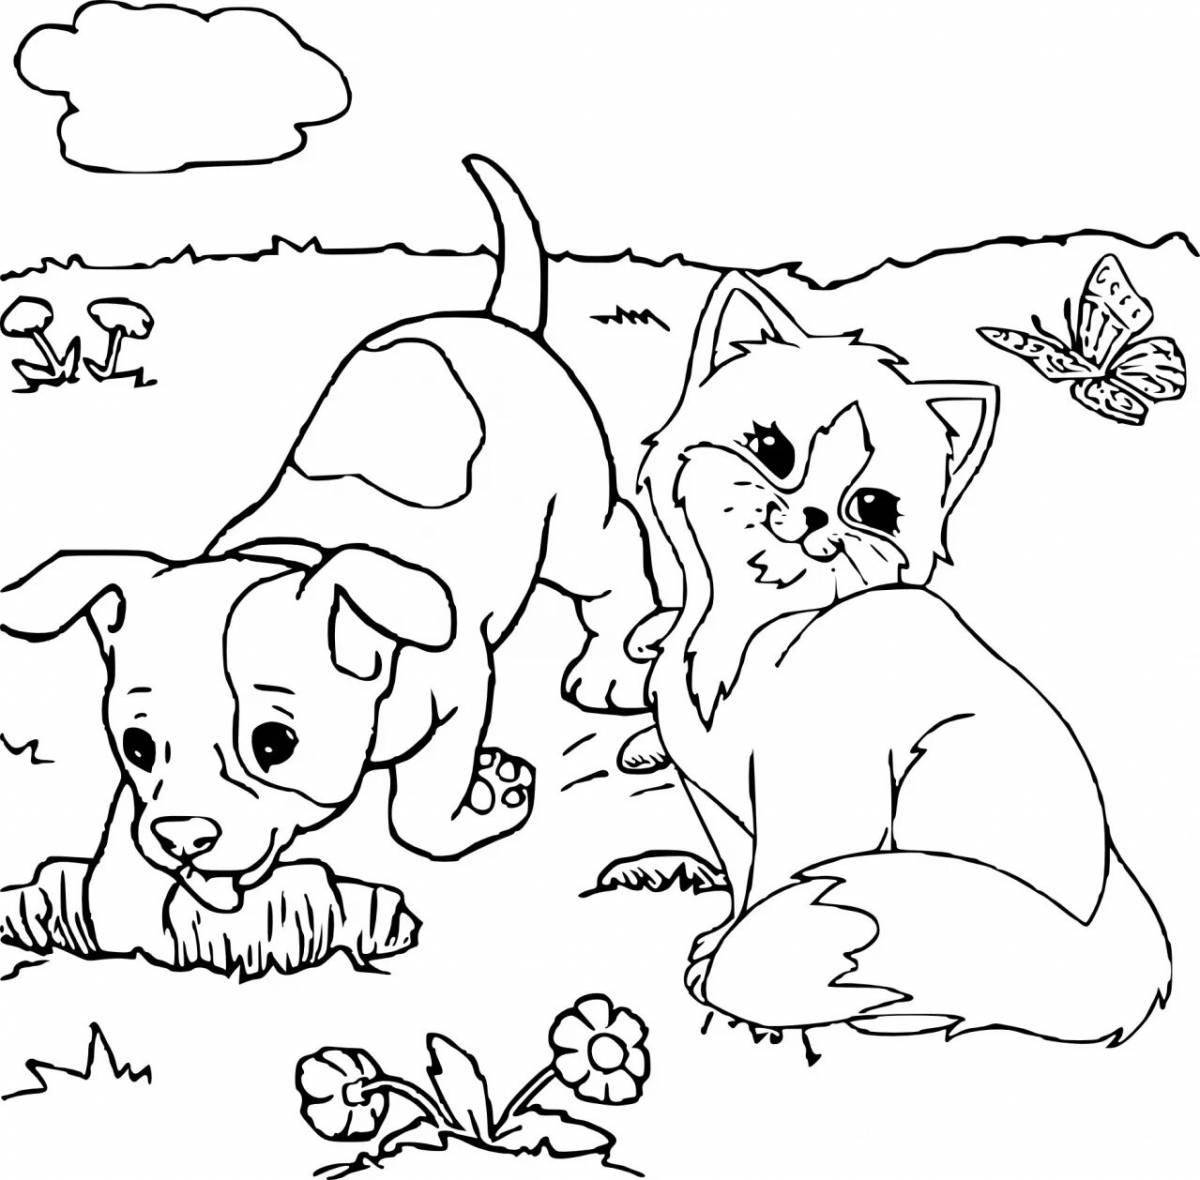 Dogs and cats for kids #12